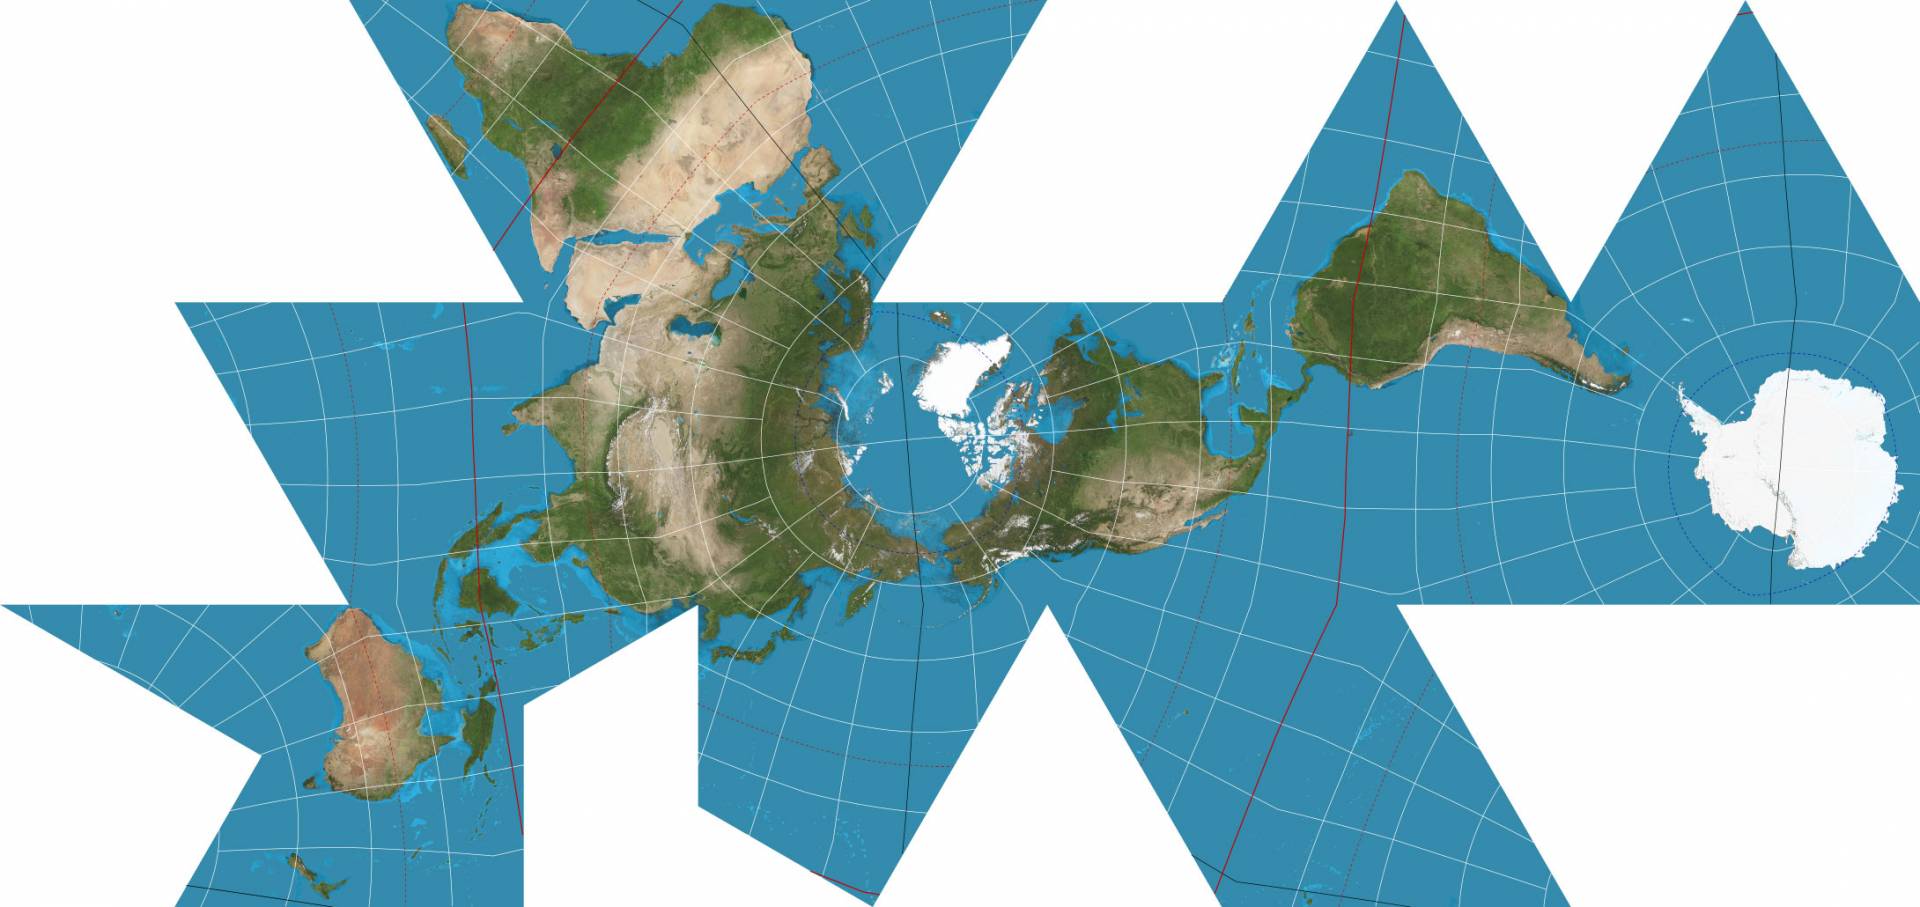 the “Dymaxion” polyhedral projection